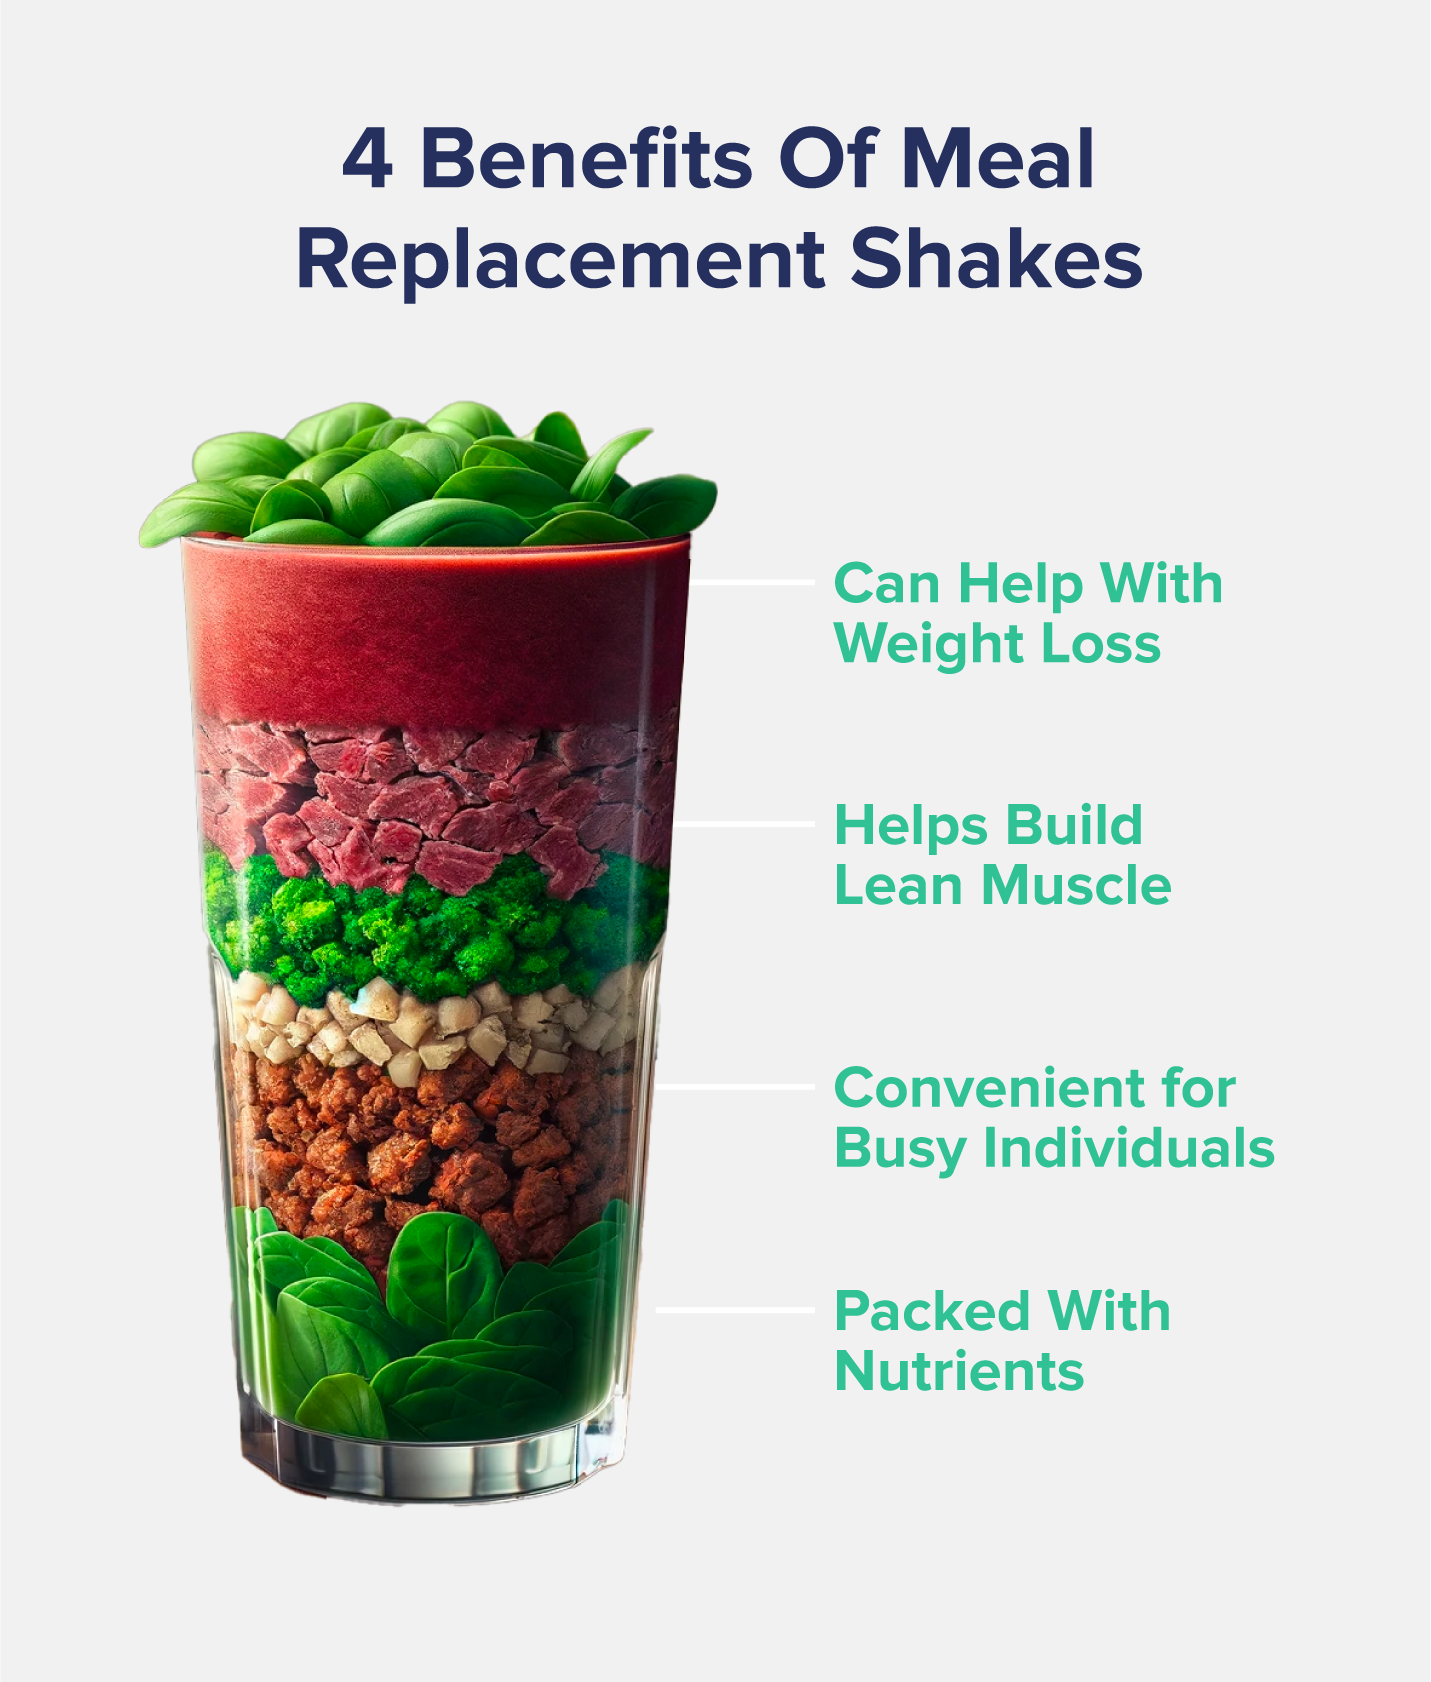 4 Benefits Of Meal Replacement Shakes